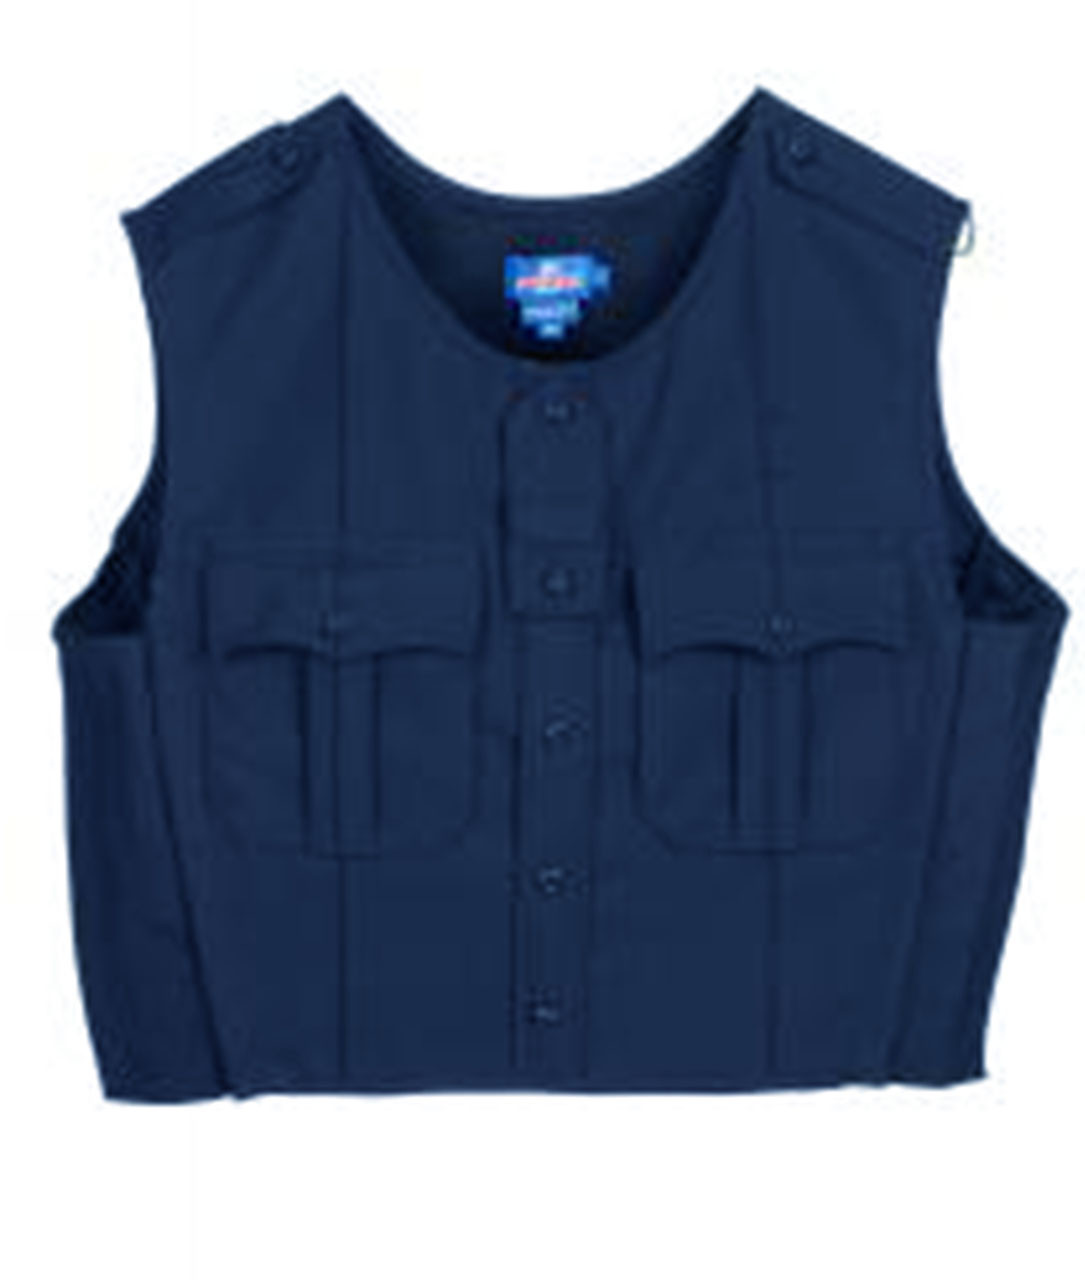 Spiewak SCRPP93 Professional Poly Men's Vest Carrier, Uniform, 2 Chest Pockets, Available in Dark Navy Blue and French Blue